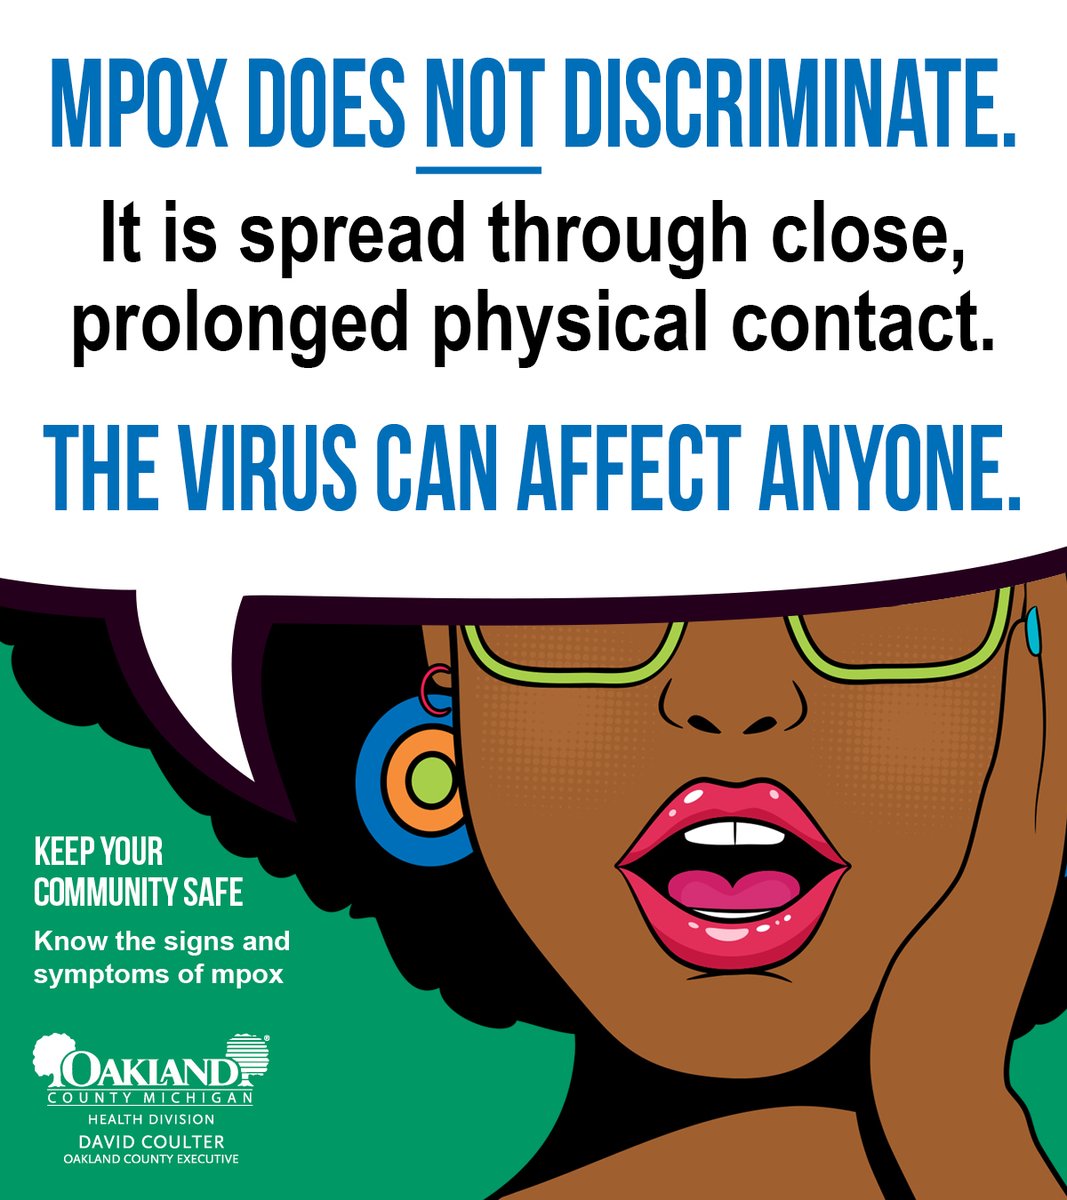 Anyone can get #Mpox but some people are at higher risk. Get the mpox vaccine if you're a gay, bisexual, same-gender loving man who has sex with men or are transgender, non-binary, or gender expansive. Learn more at bit.ly/3ILjPa9